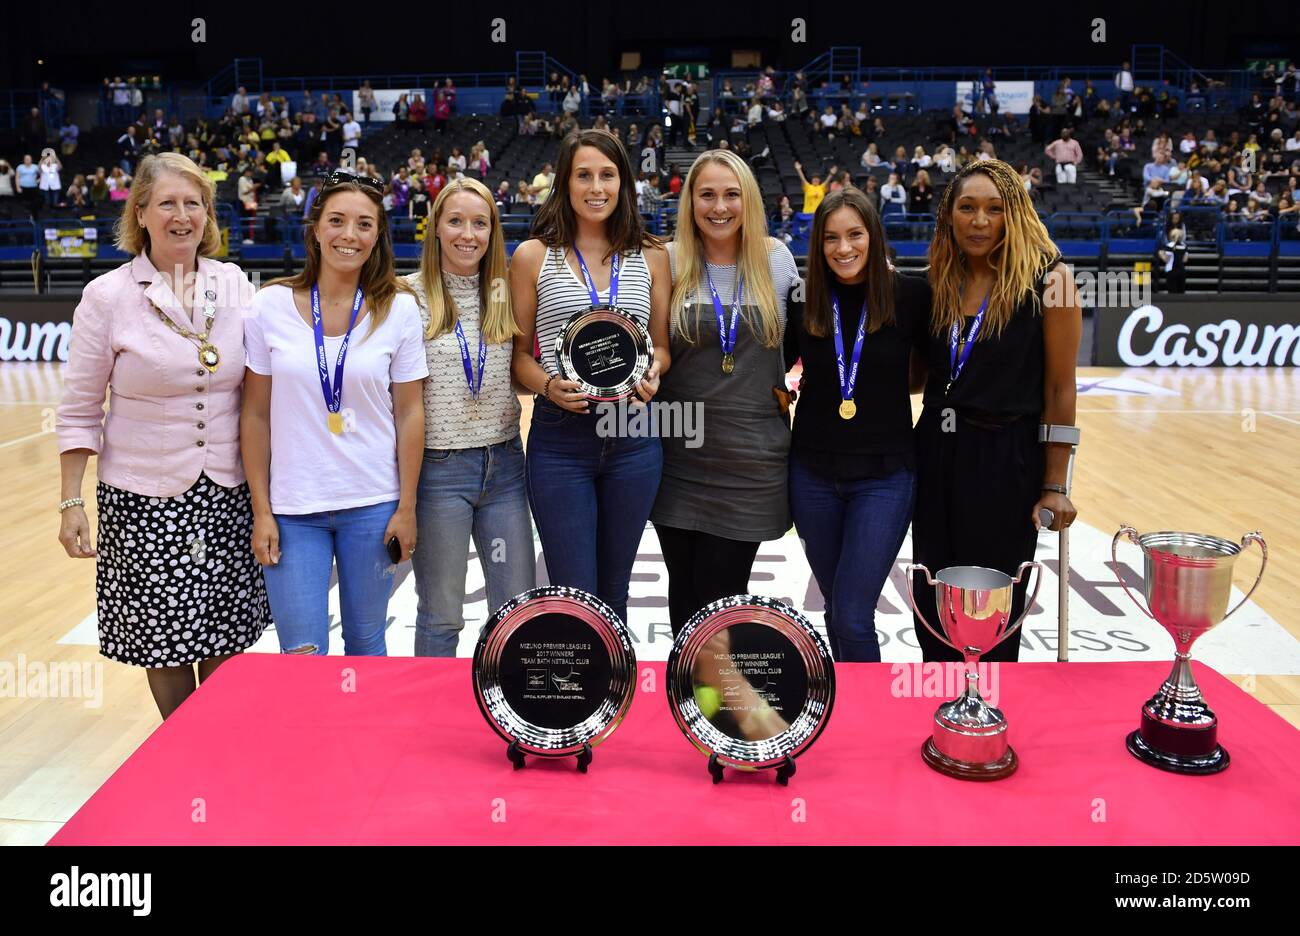 Sussex Netball club are presented with the award for winning the Mizuno Premier League 3 during the presentation ceremony Stock Photo